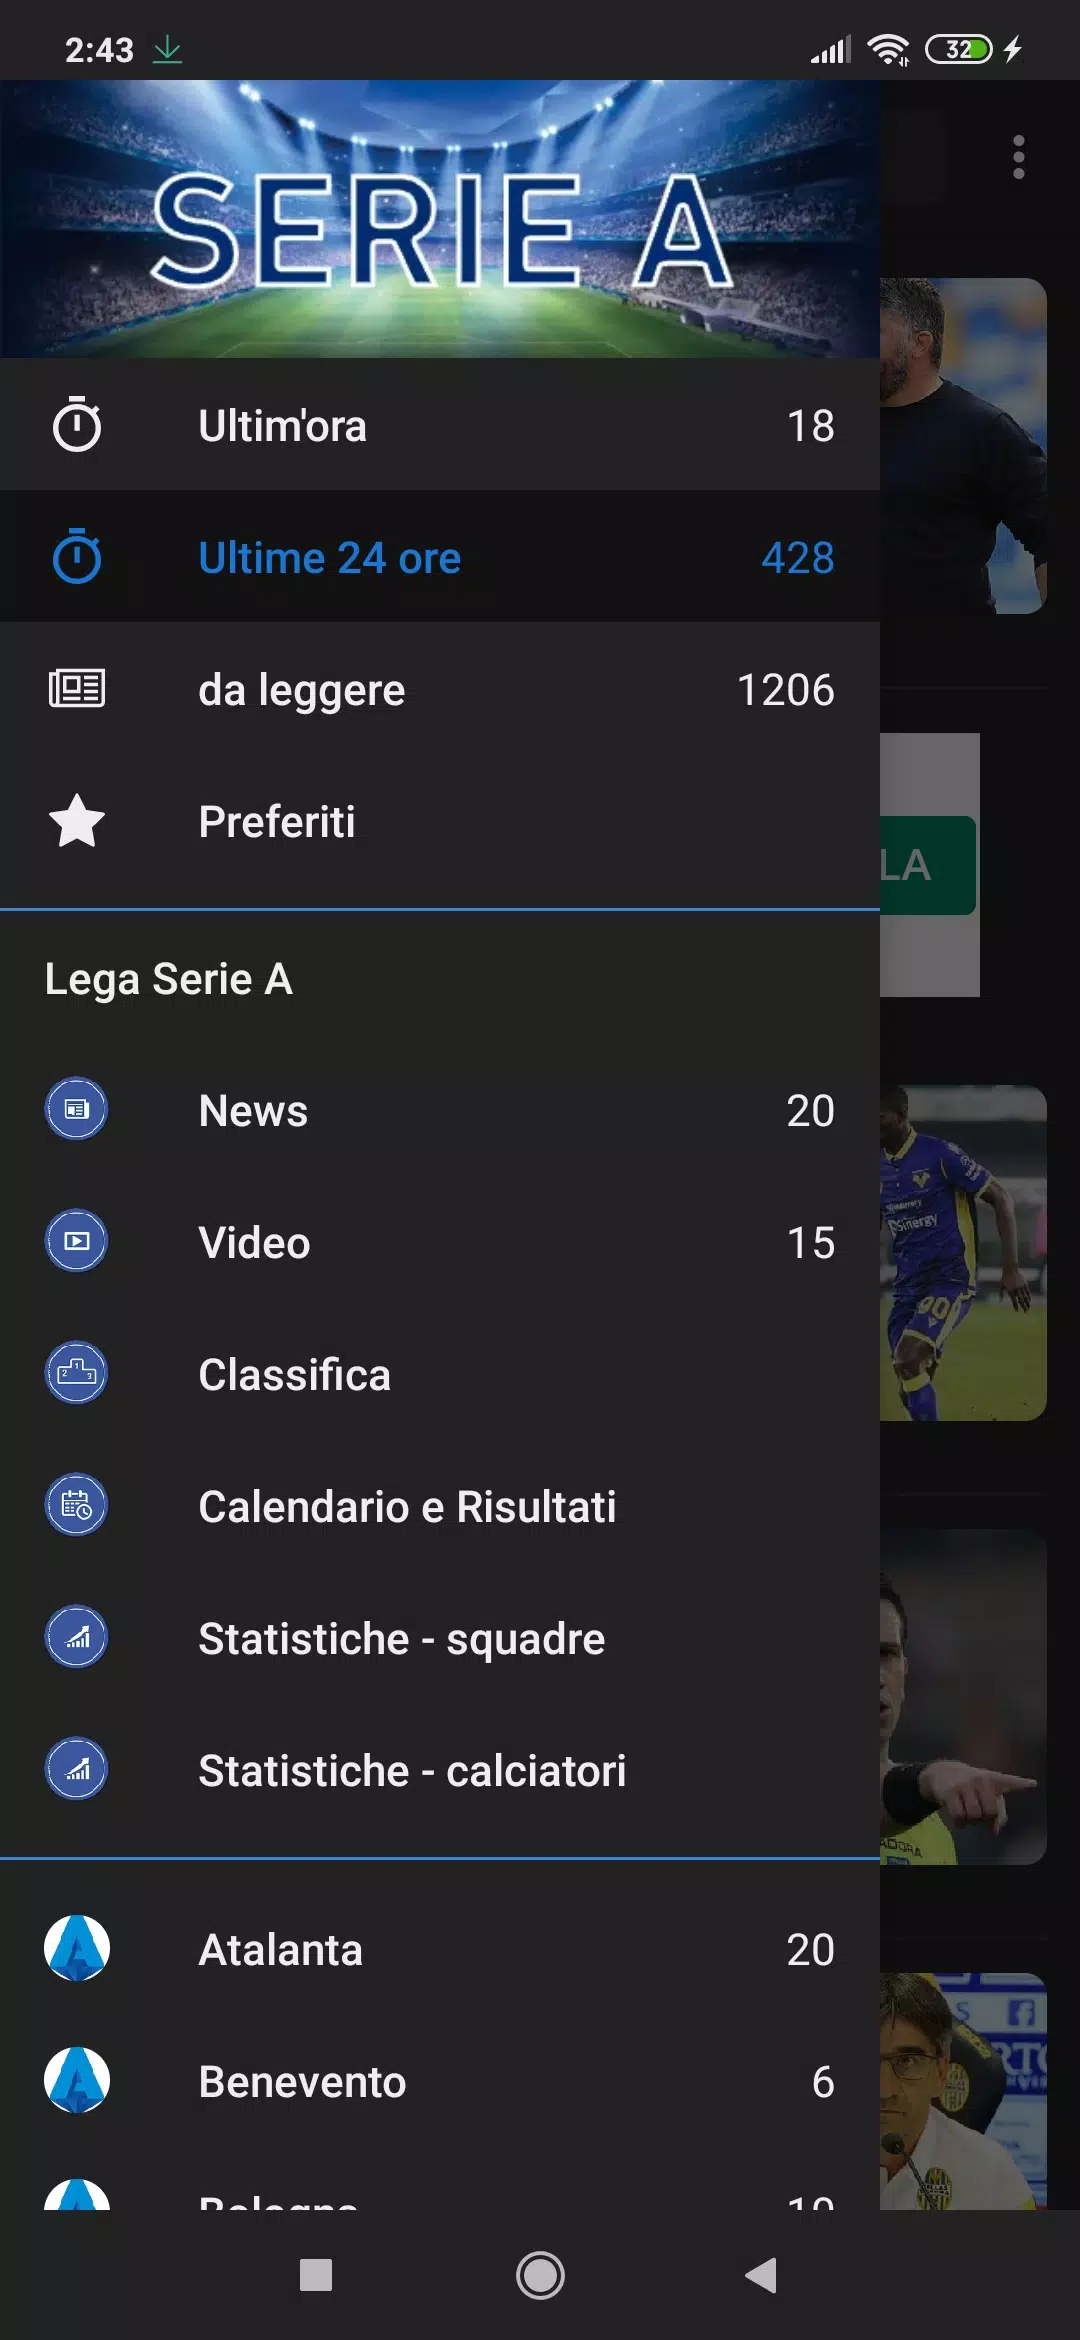 News - Calcio Serie A for Android - APK Download